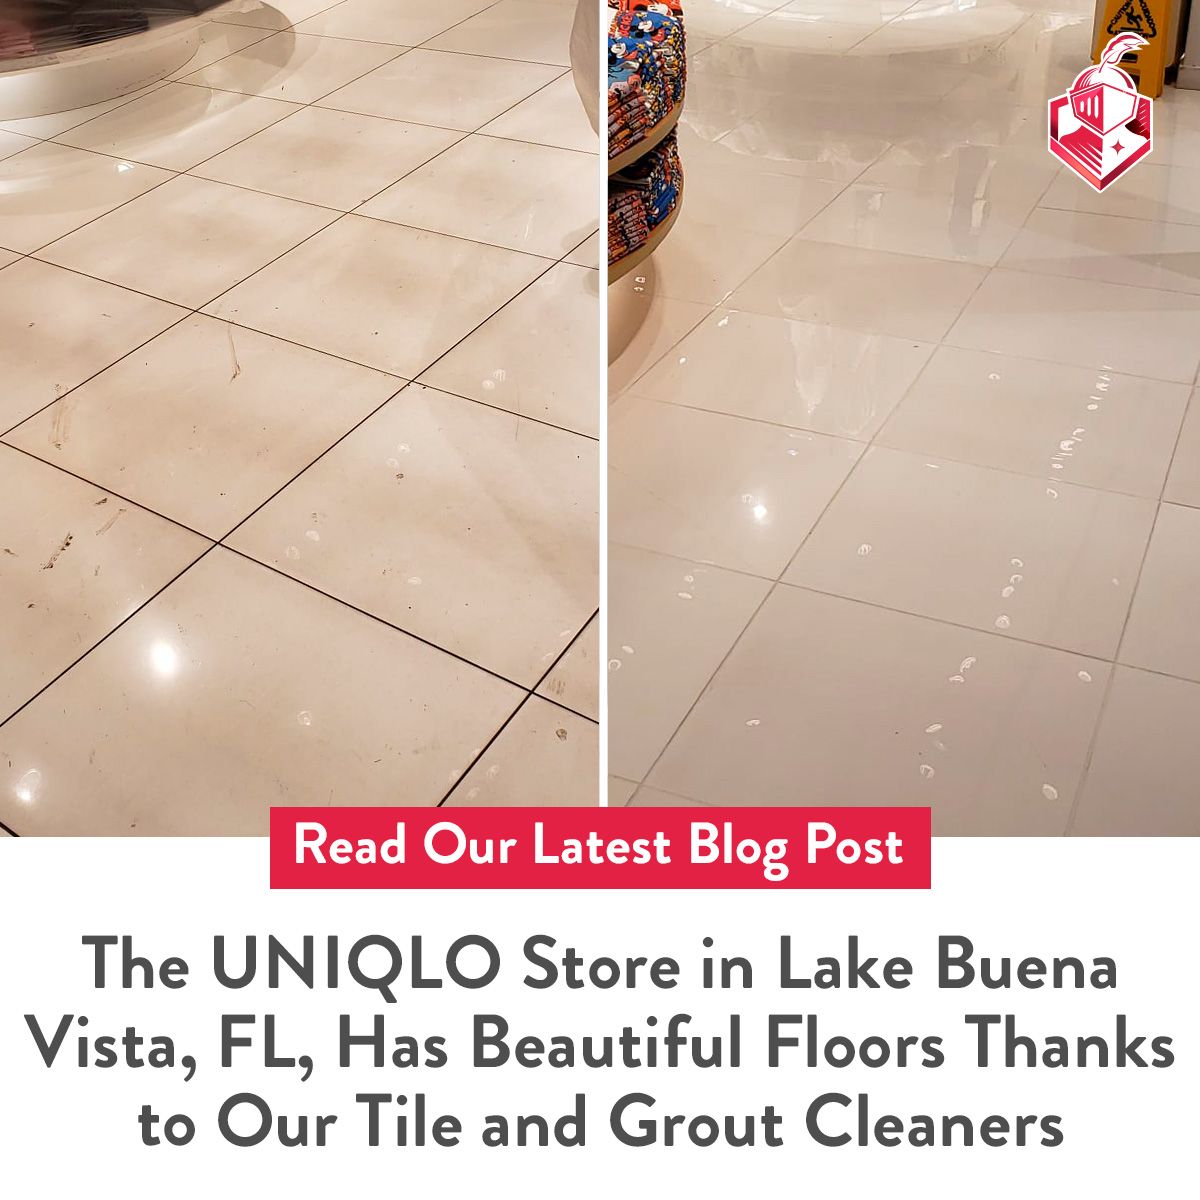 The UNIQLO Store in Lake Buena Vista, FL, Has Beautiful Floors Thanks to Our Tile and Grout Cleaners